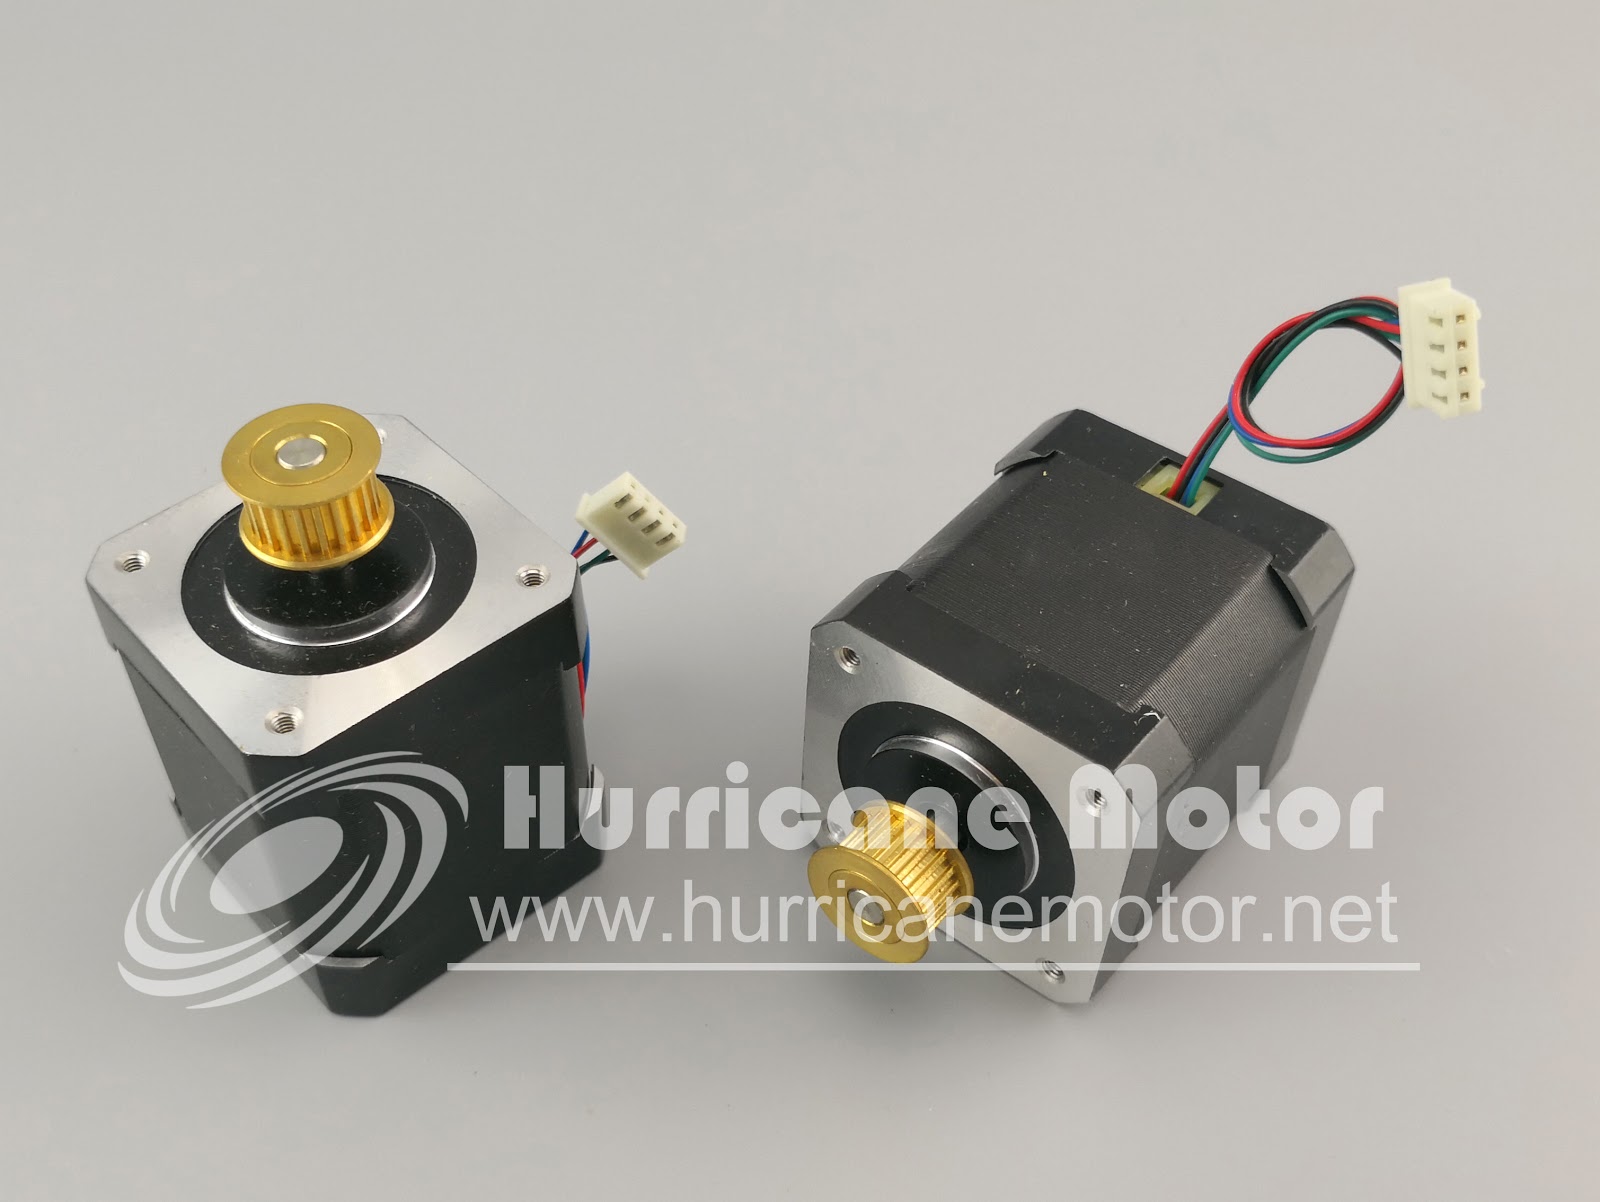 DC Stepping Motor สเต็ปมอเตอร์ สเต็ปมอเตอร์ คอนโทรลเลอร์ 4 Phase 5 Wire Stepper Motor Gear Stepping Motor 2 Phase 4 Wire Stepper Motor 35/39/42/57 Stepper Motor Driver Controller